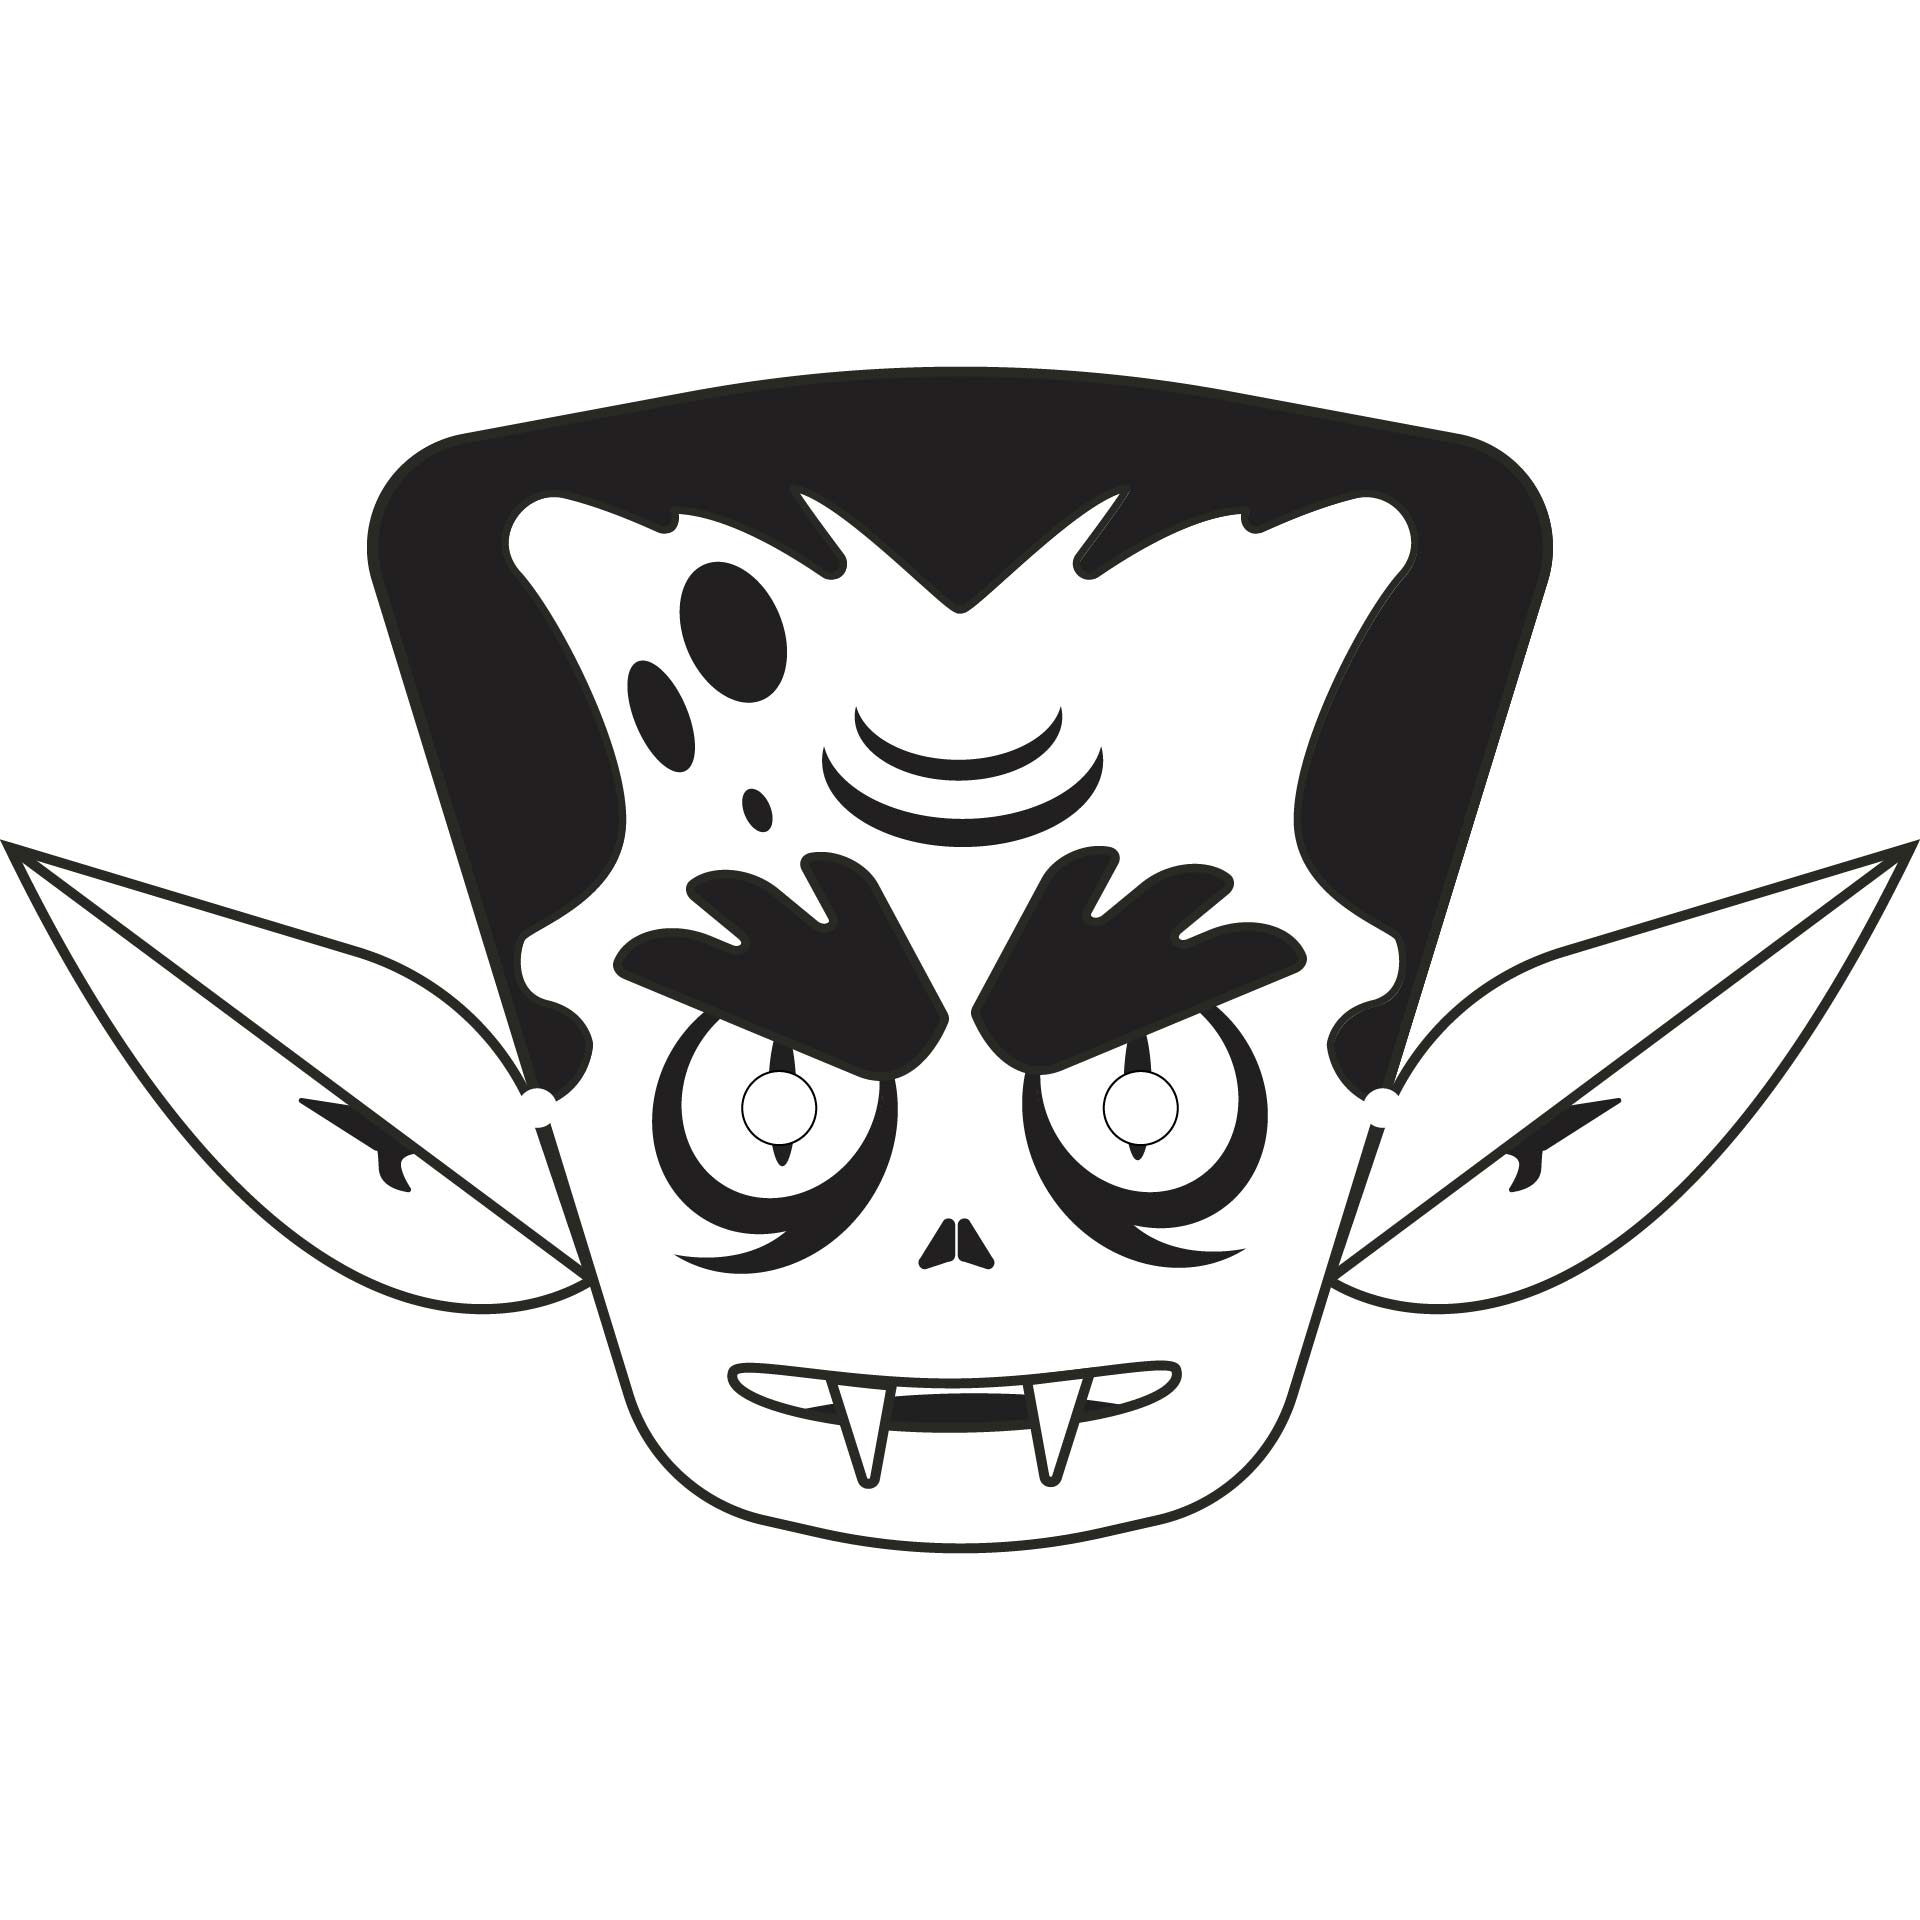 Halloween Vampire Mask - Paper Craft Black And White Template